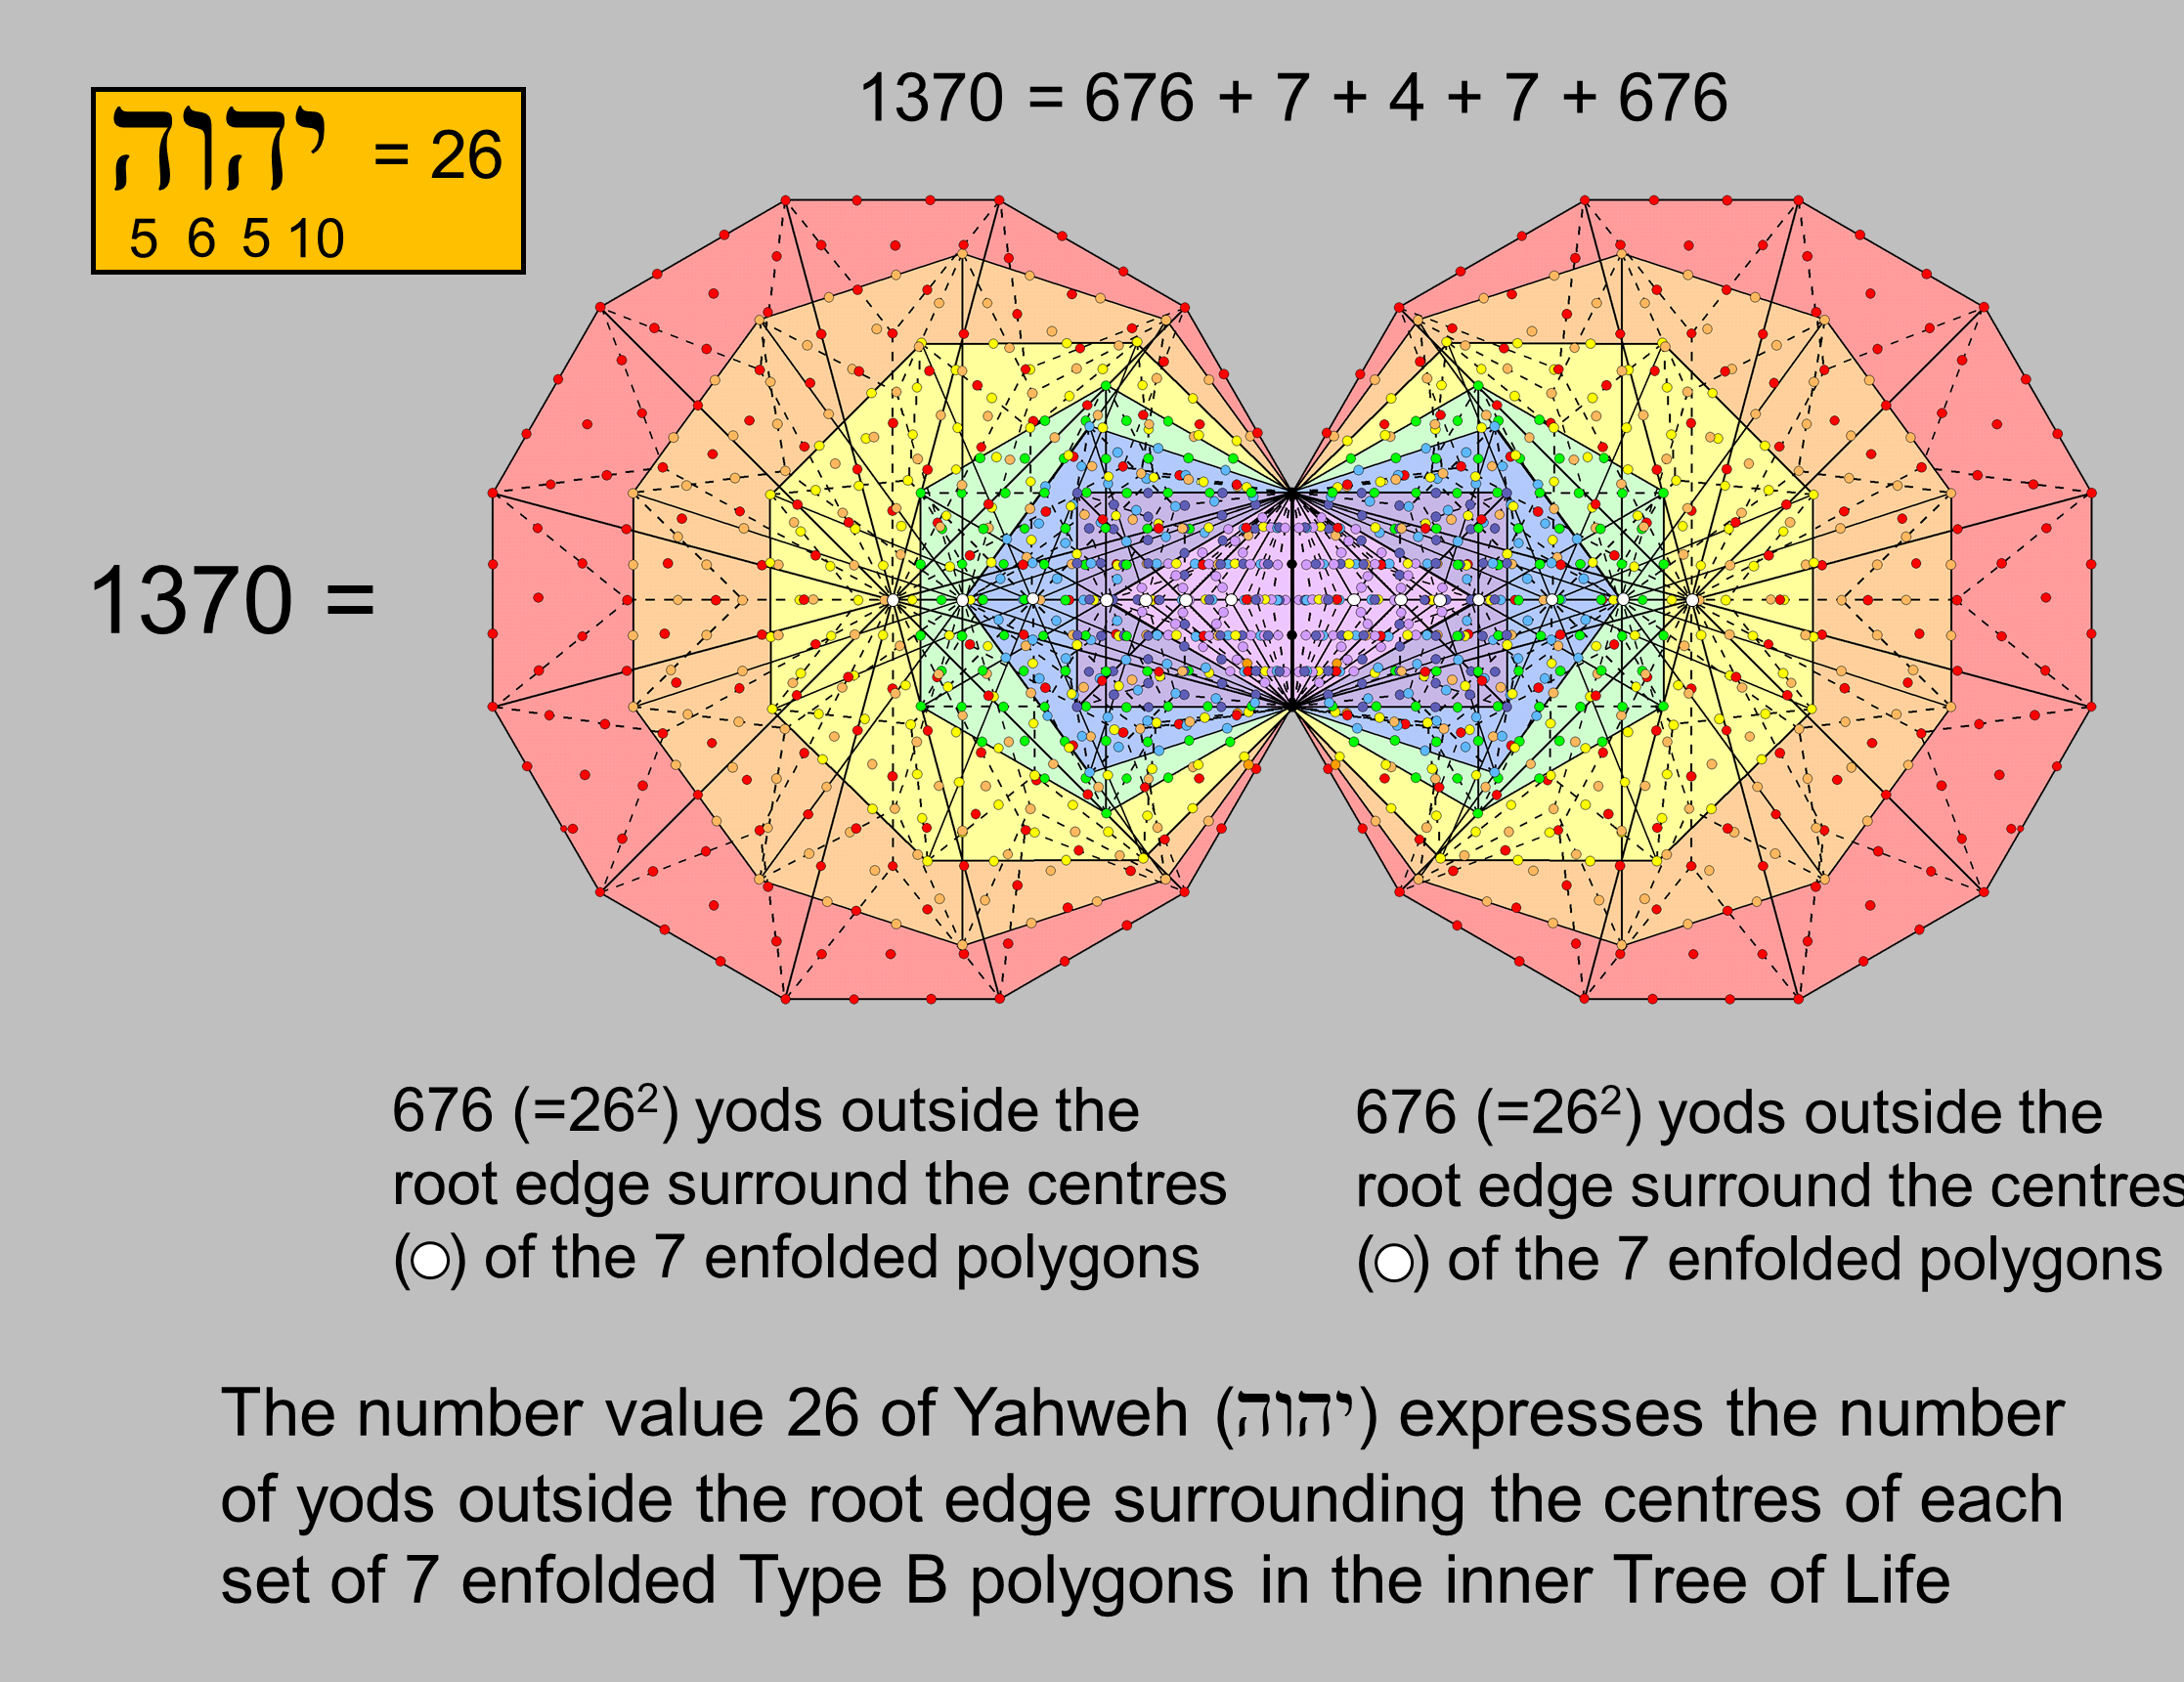 Yahweh prescribes number of yods surrounding centres of 7 Type B polygons